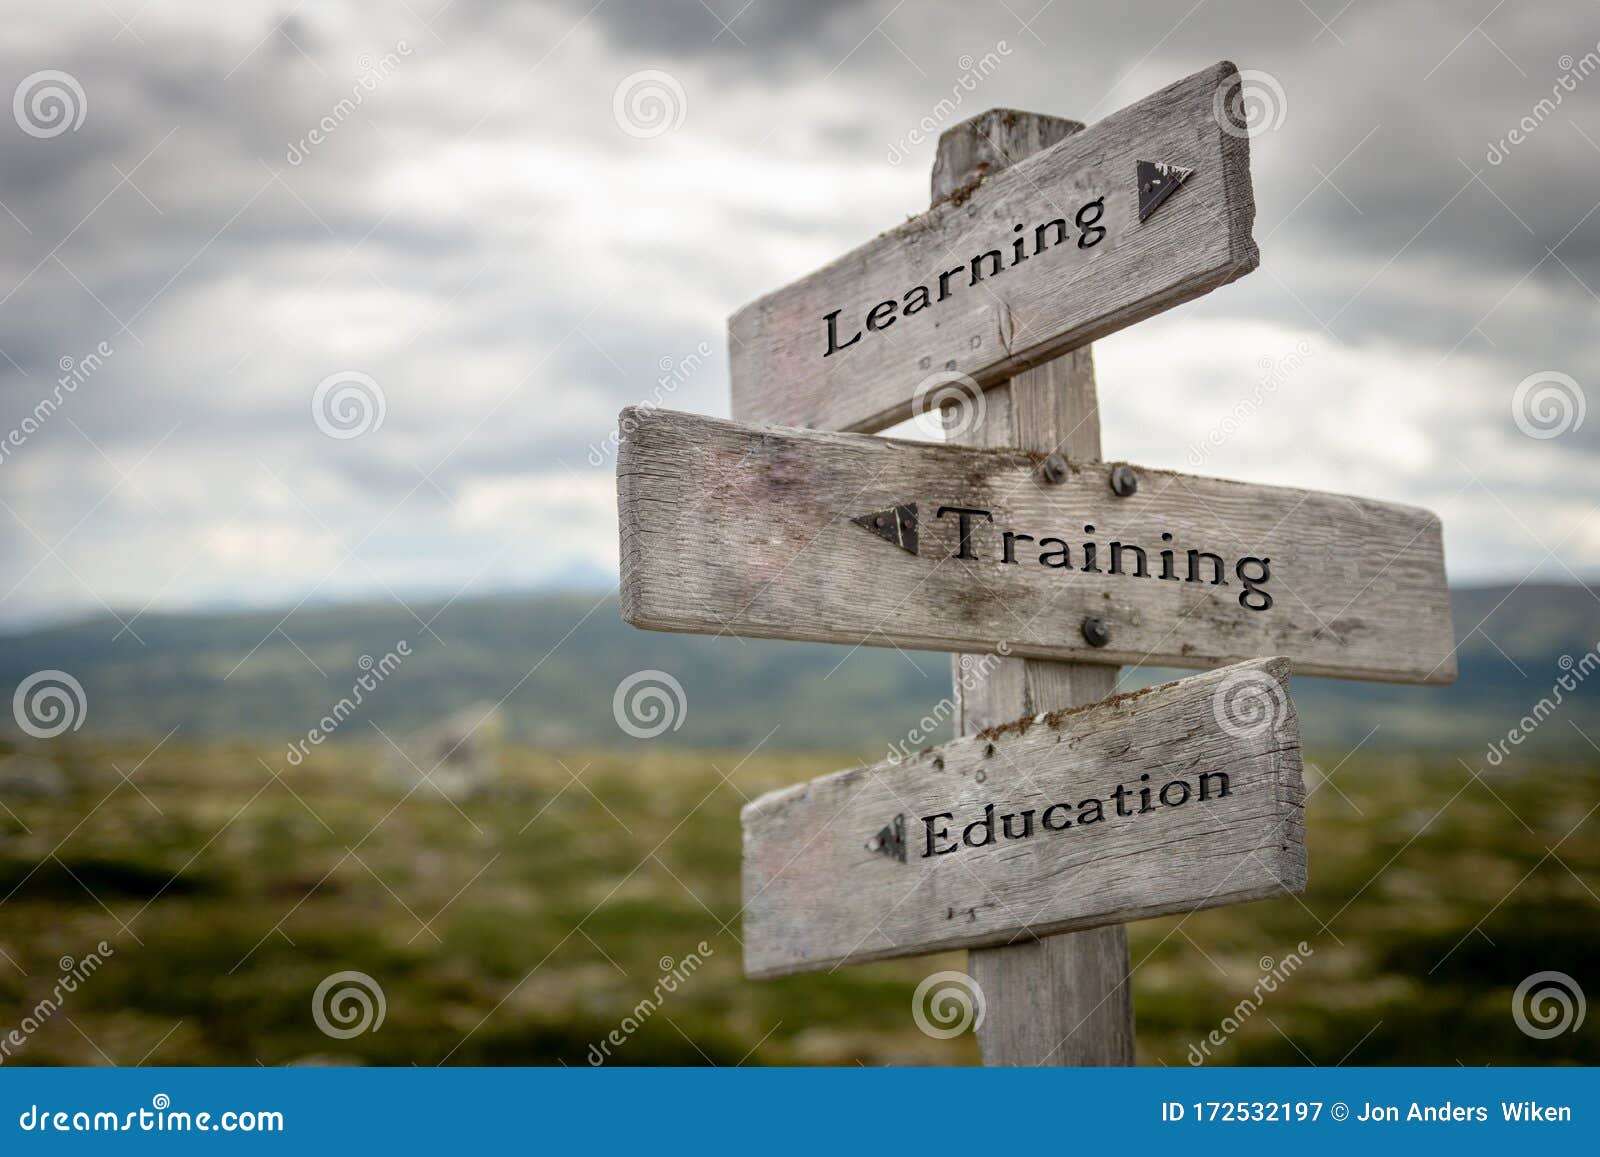 learning, training and education